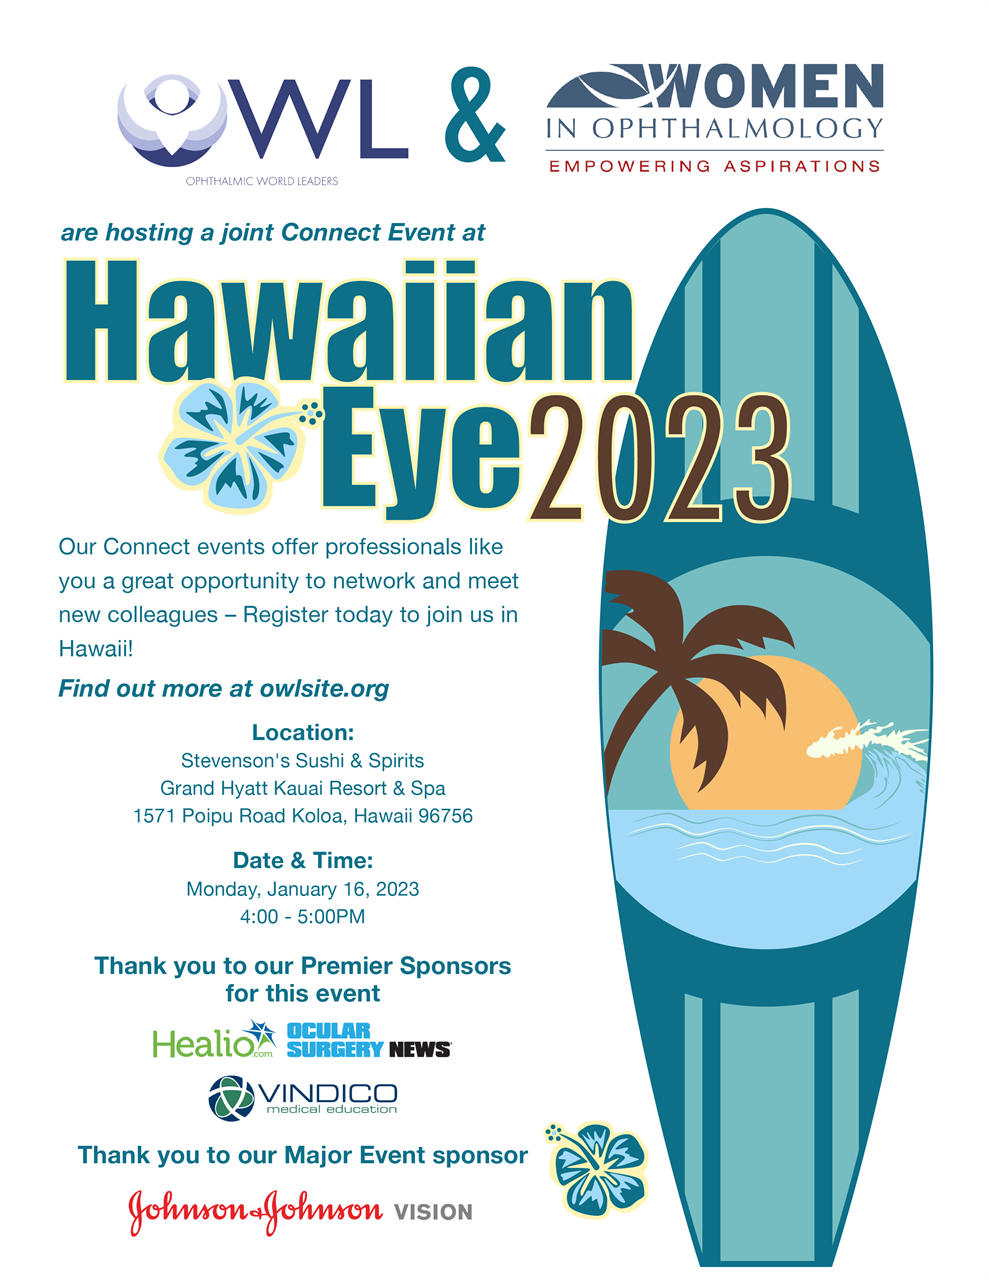 OWL & WIO are hosting a joint Connect Event at Hawaiian Eye on January 16, 2023; 4 PM. Location: Steven's Sushi & Spirits - Grand Hyatt Kauai Resort & Spa, 1571 Poipu Road Koloa, Hawaii 96756 | Thank you to our sponsors: Healio, Vindico and Johnson & Johnson Vision. Our Connect events offer professionals like you a great opportunity to network and meet new colleagues. Register today!